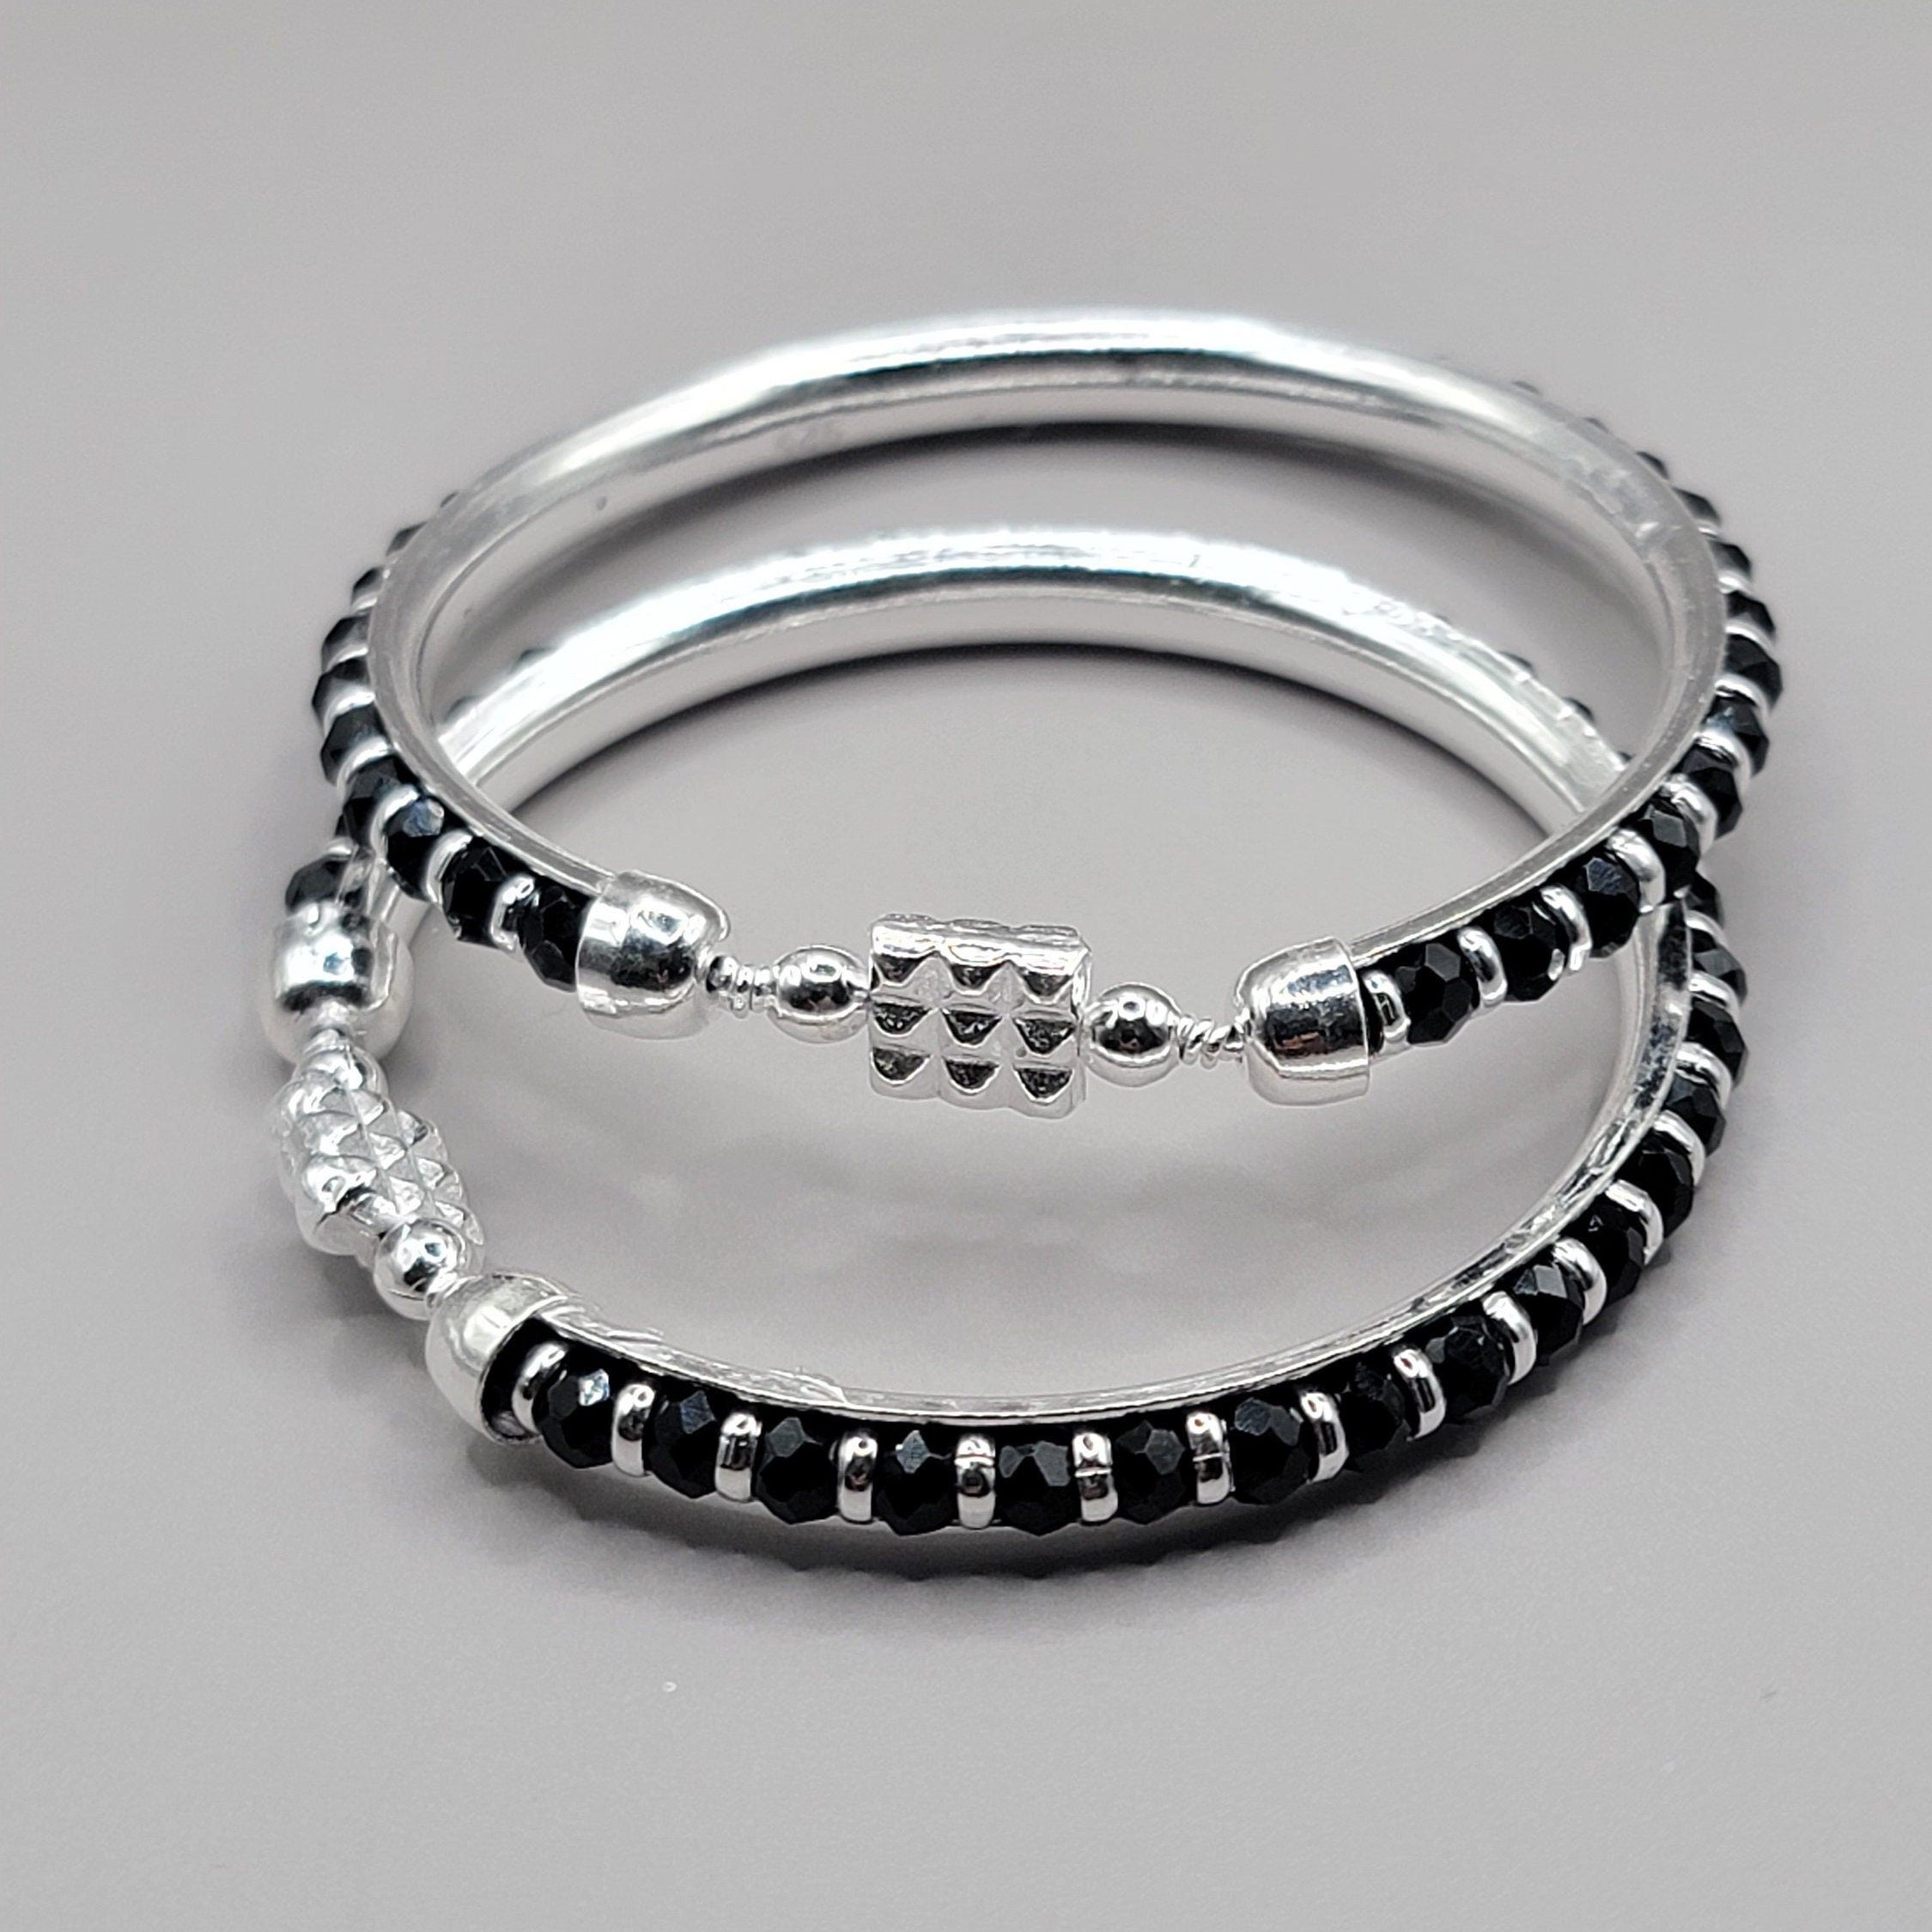 Shop Pure Silver Baby Bangles with Black Beeds Pair-19 Gms